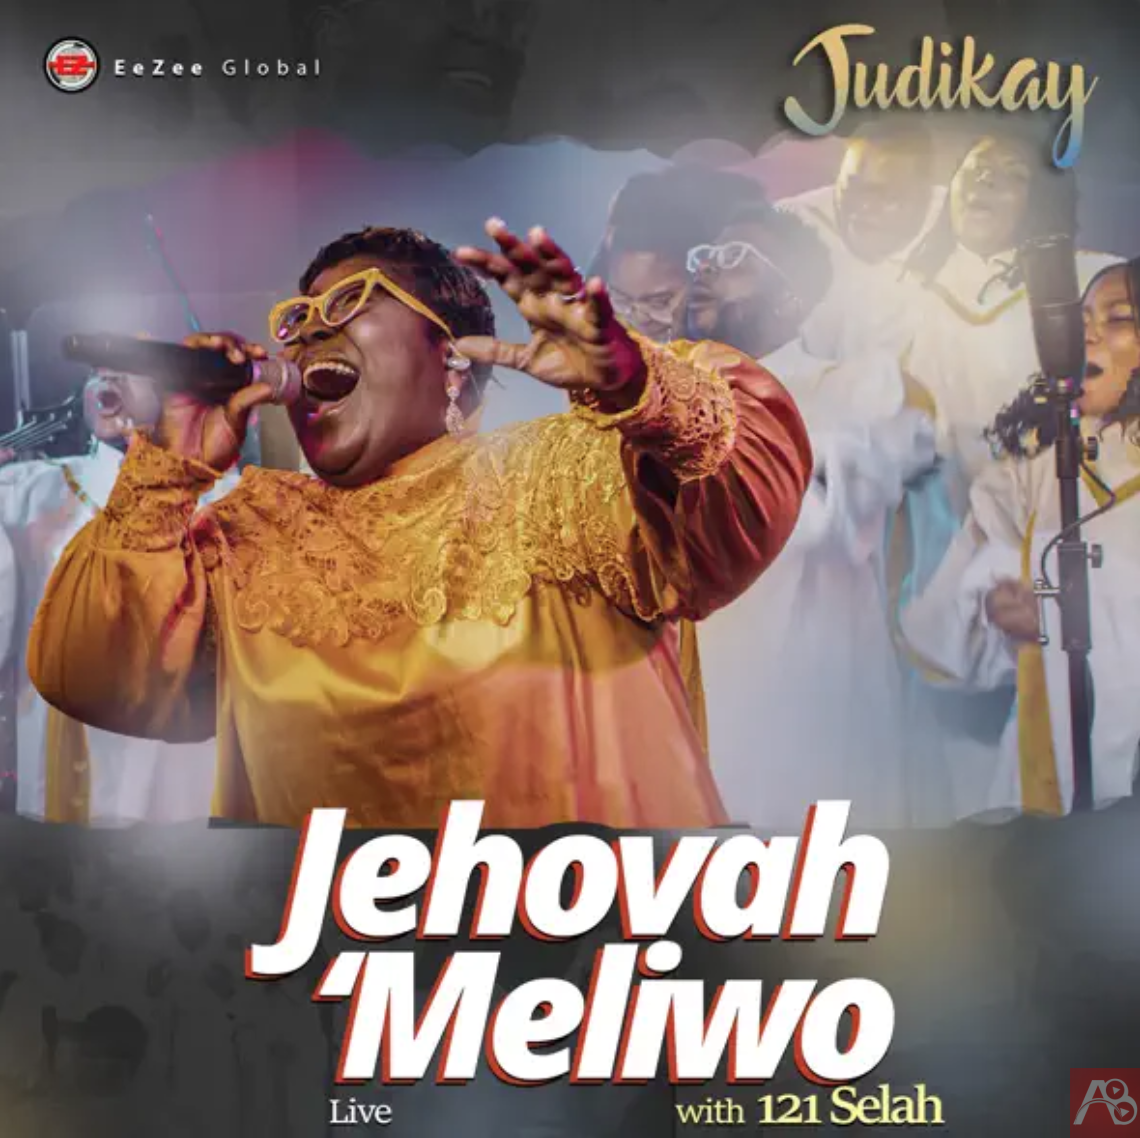 jehovah meliwo mp3 download